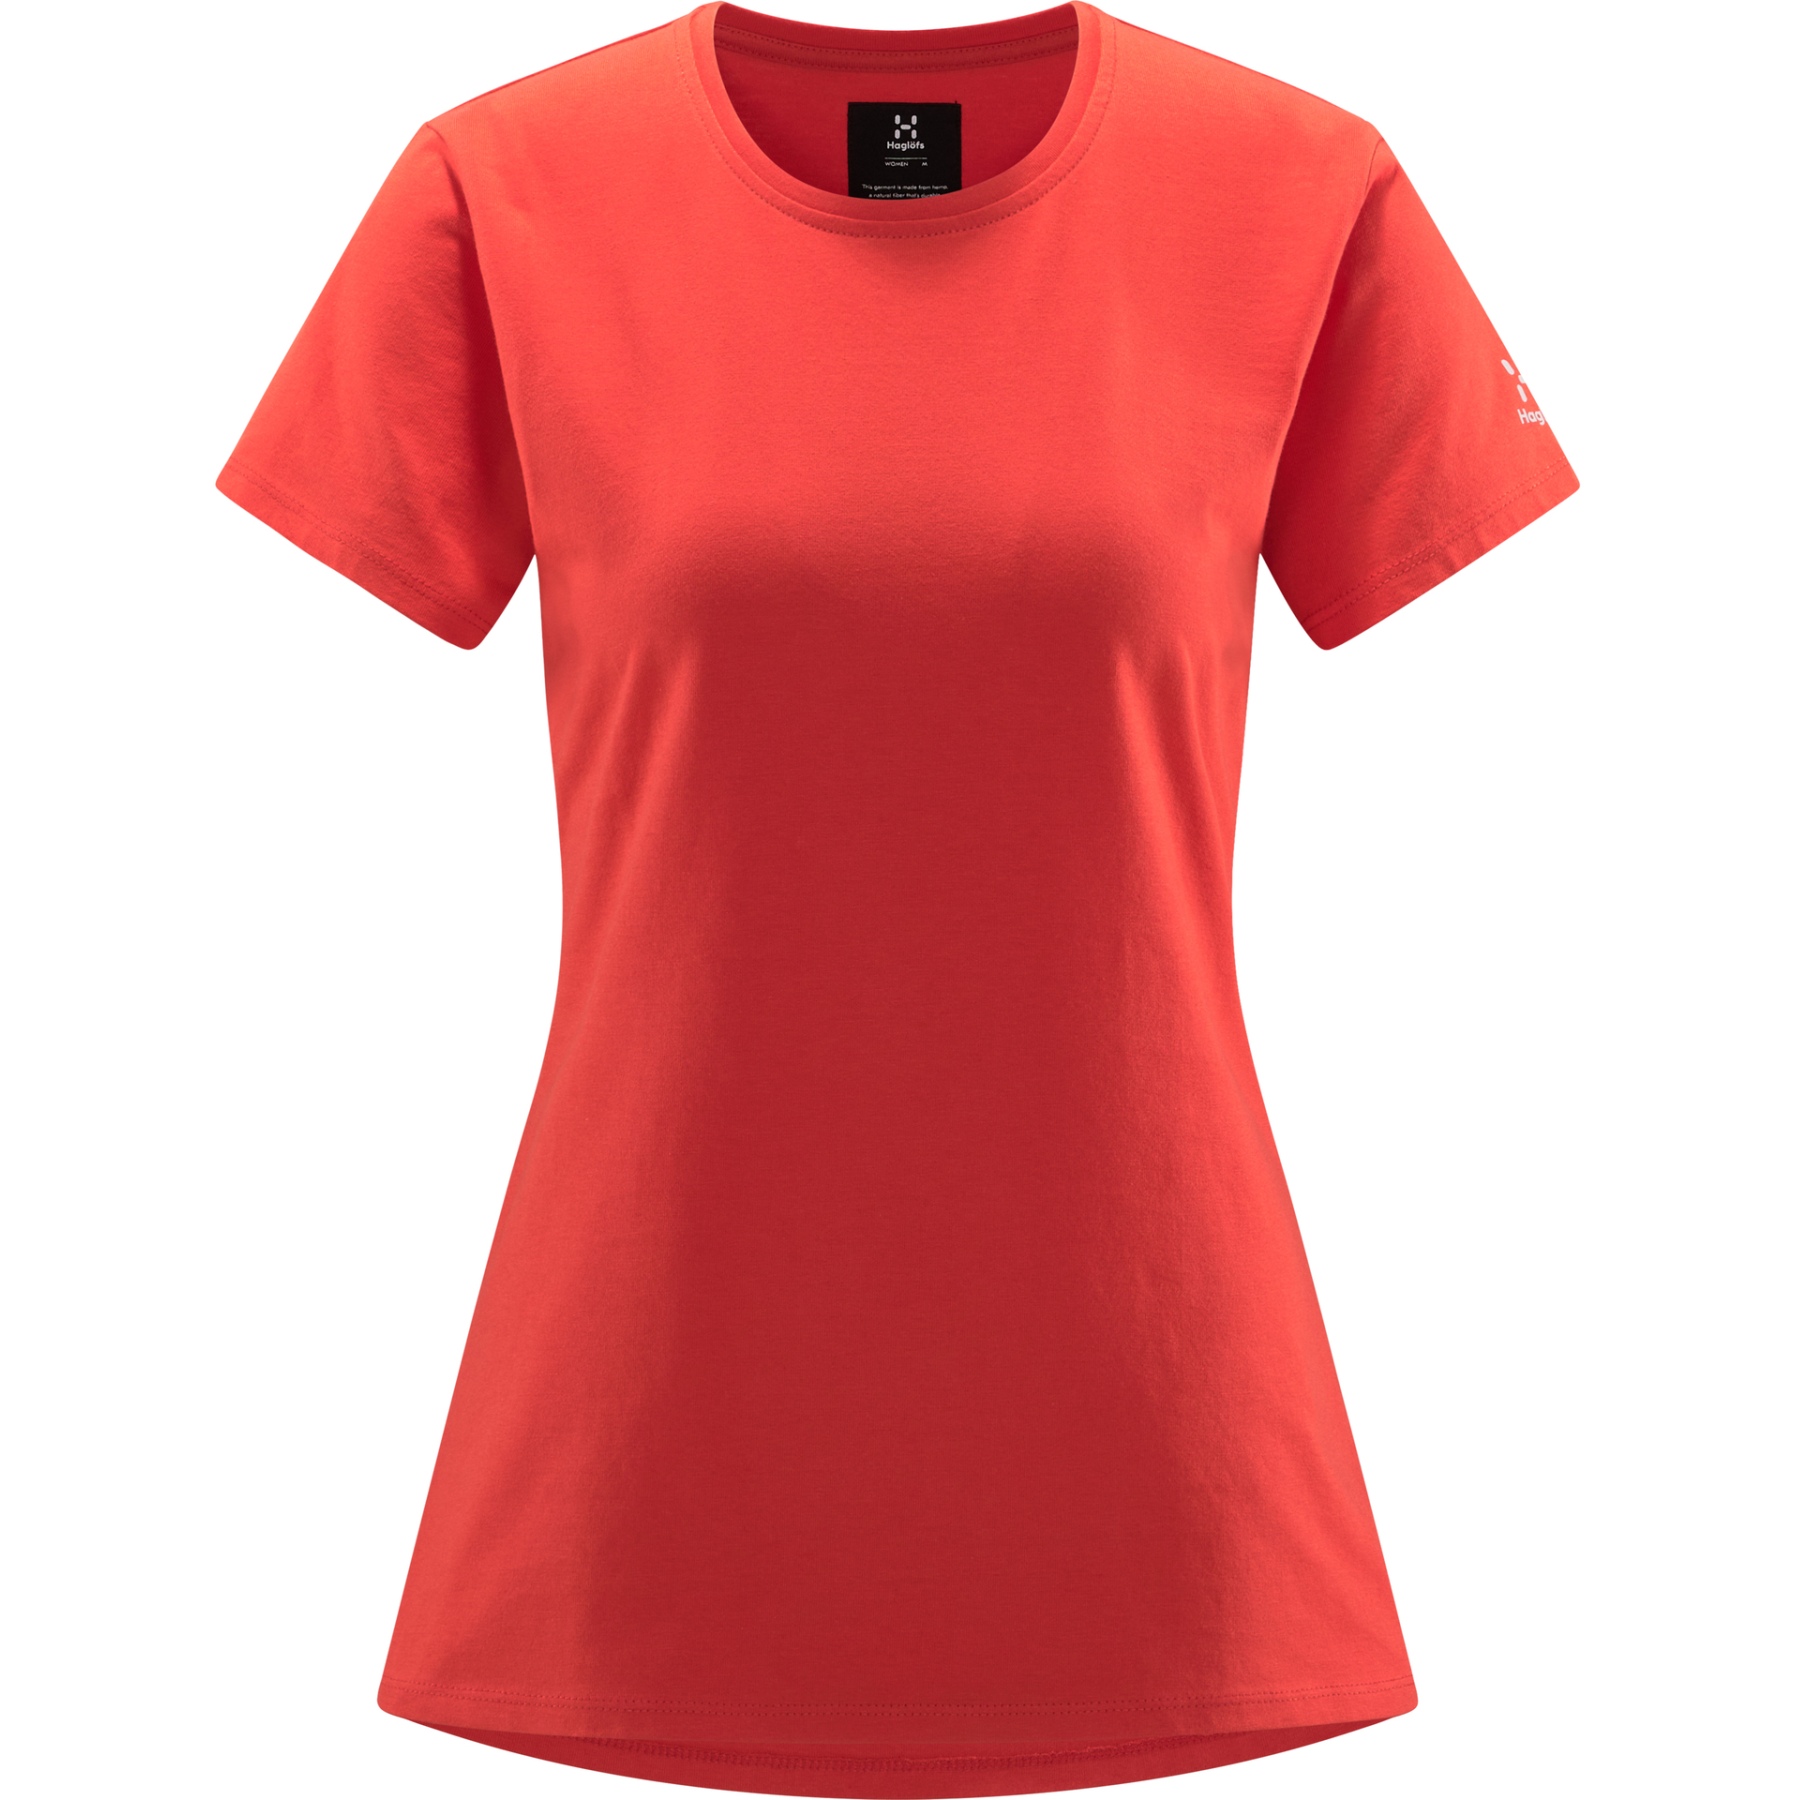 Picture of Haglöfs Outsider by Nature Tee Women - poppy red 5LI